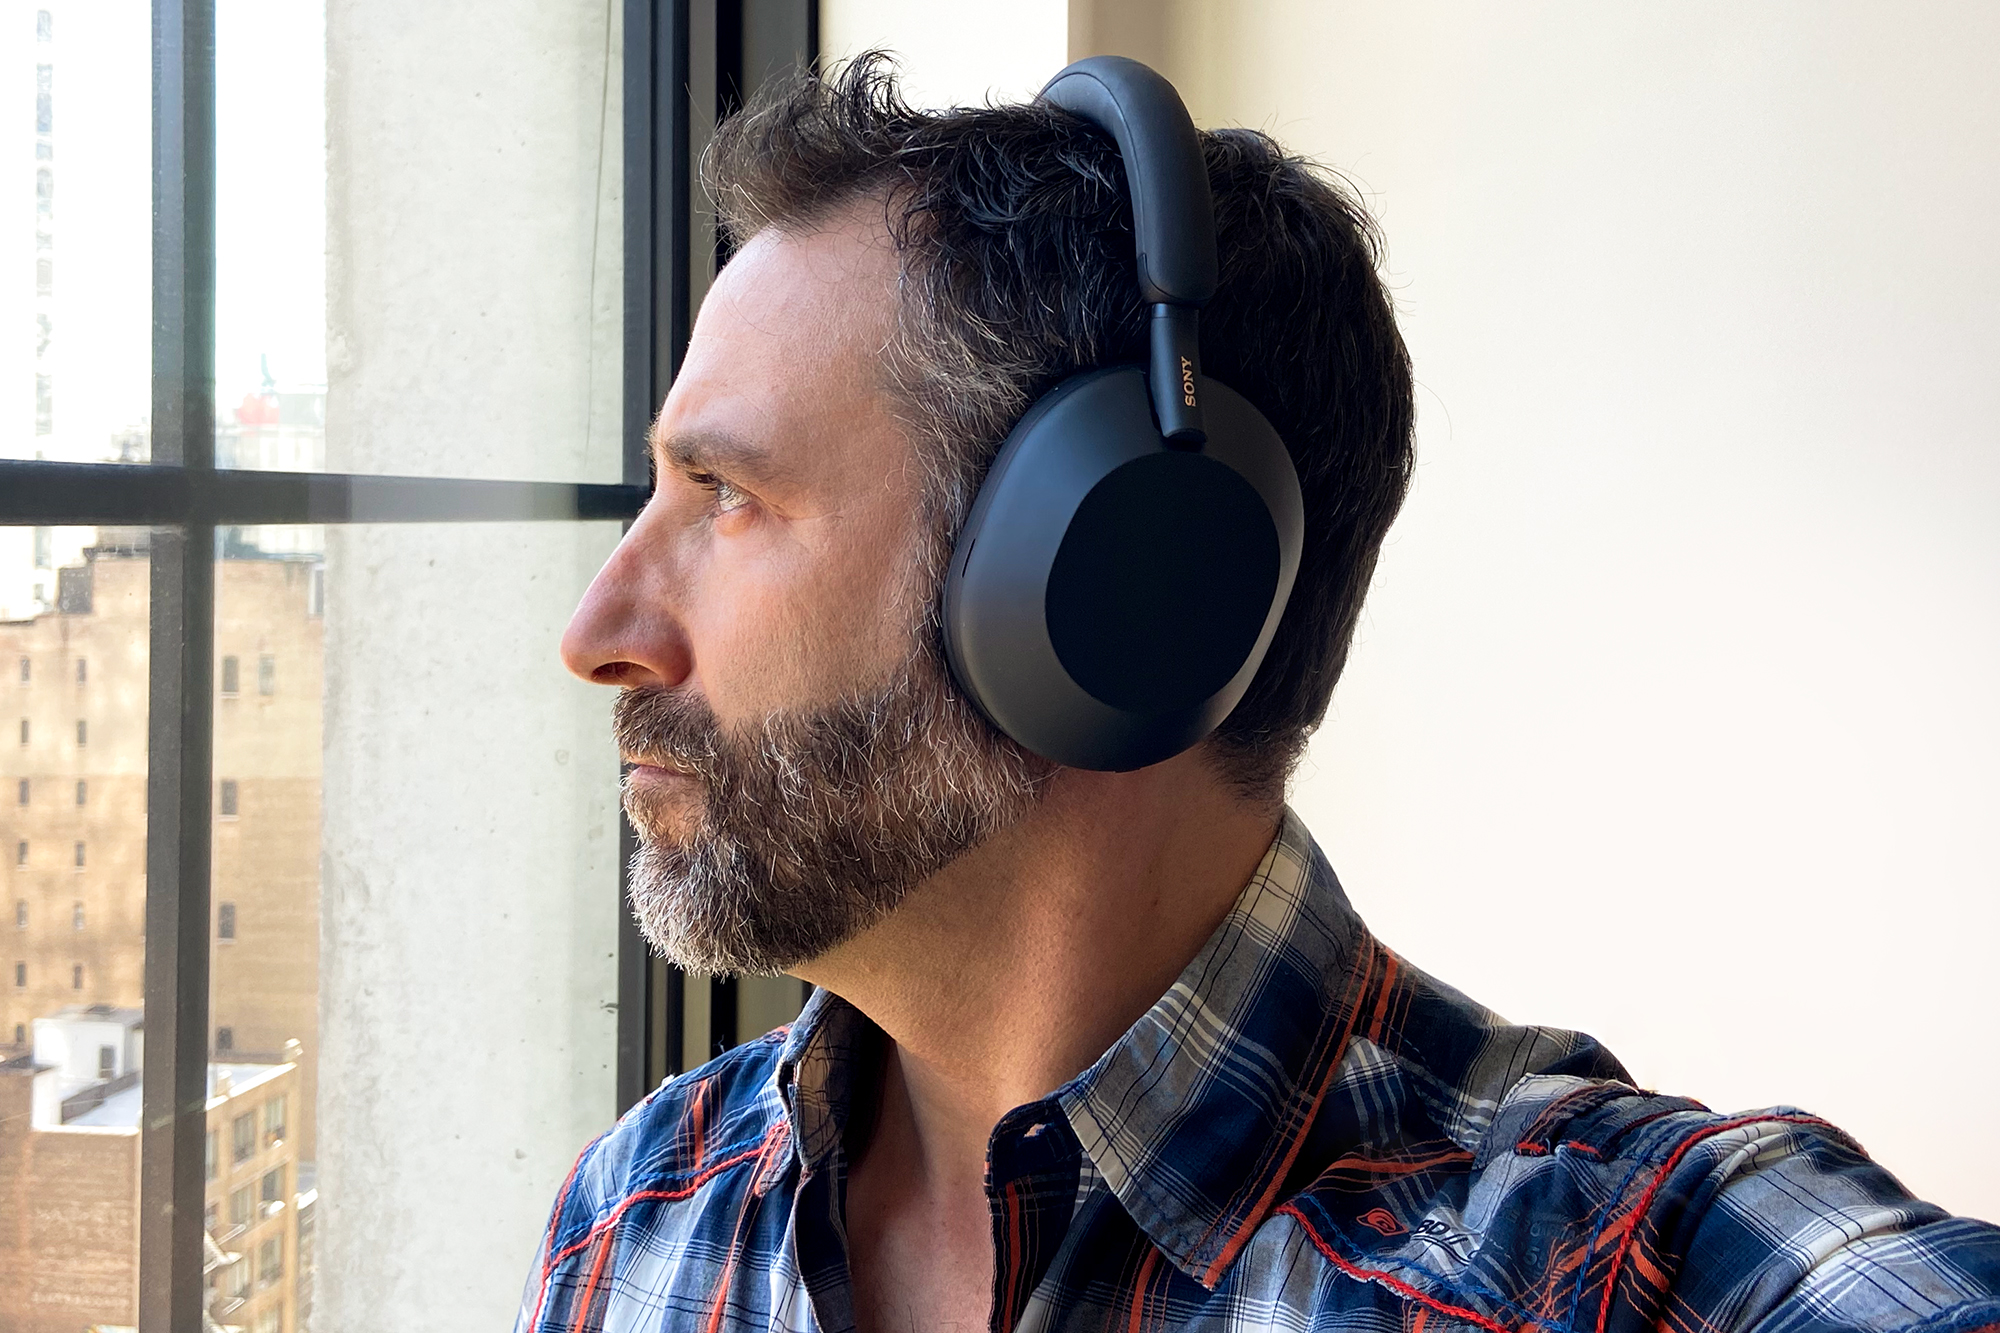 Sony WH-1000XM5 wireless headphones are discounted again